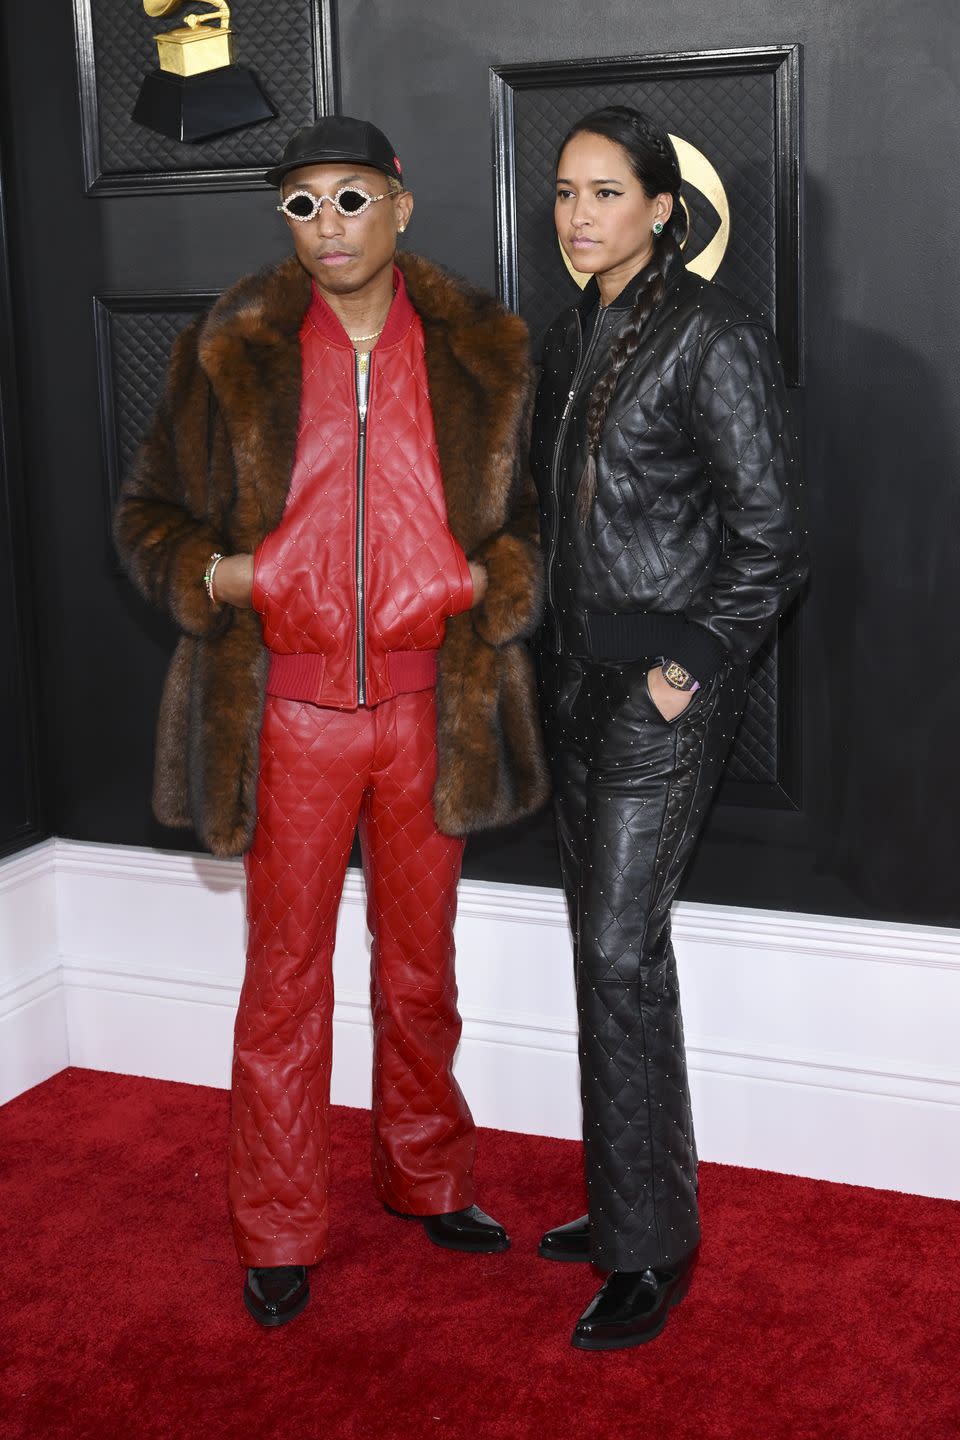 <p>Pharrell Williams managed to channel both Margot and Richie Tenenbaum with his Grammys look: a quilted red leather set embellished with silver pearls worn under a faux-fur jacket. Helen Lasichanh matched in a black set sans coat.</p>